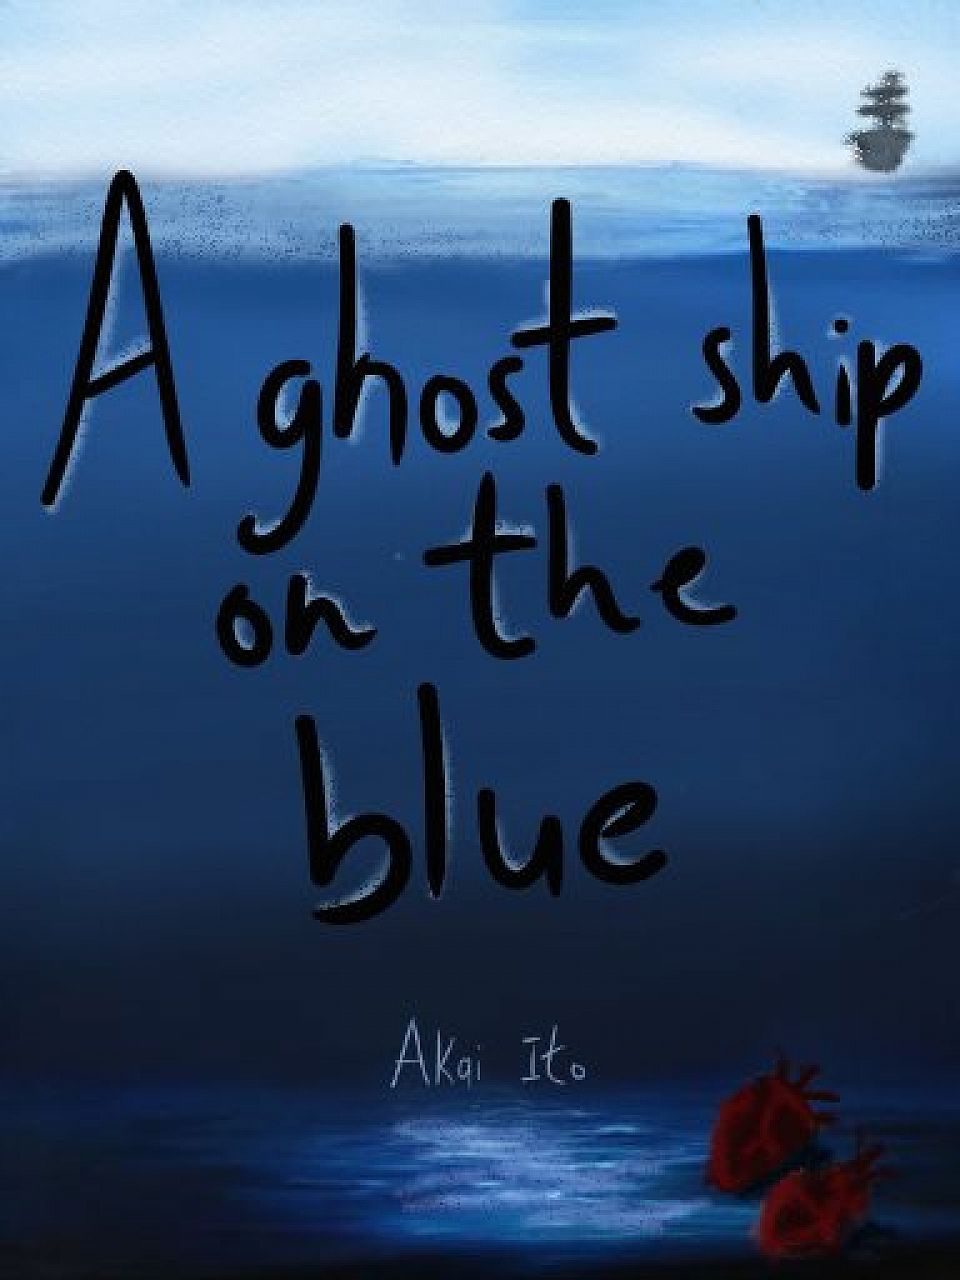 A ghost ship on the blue